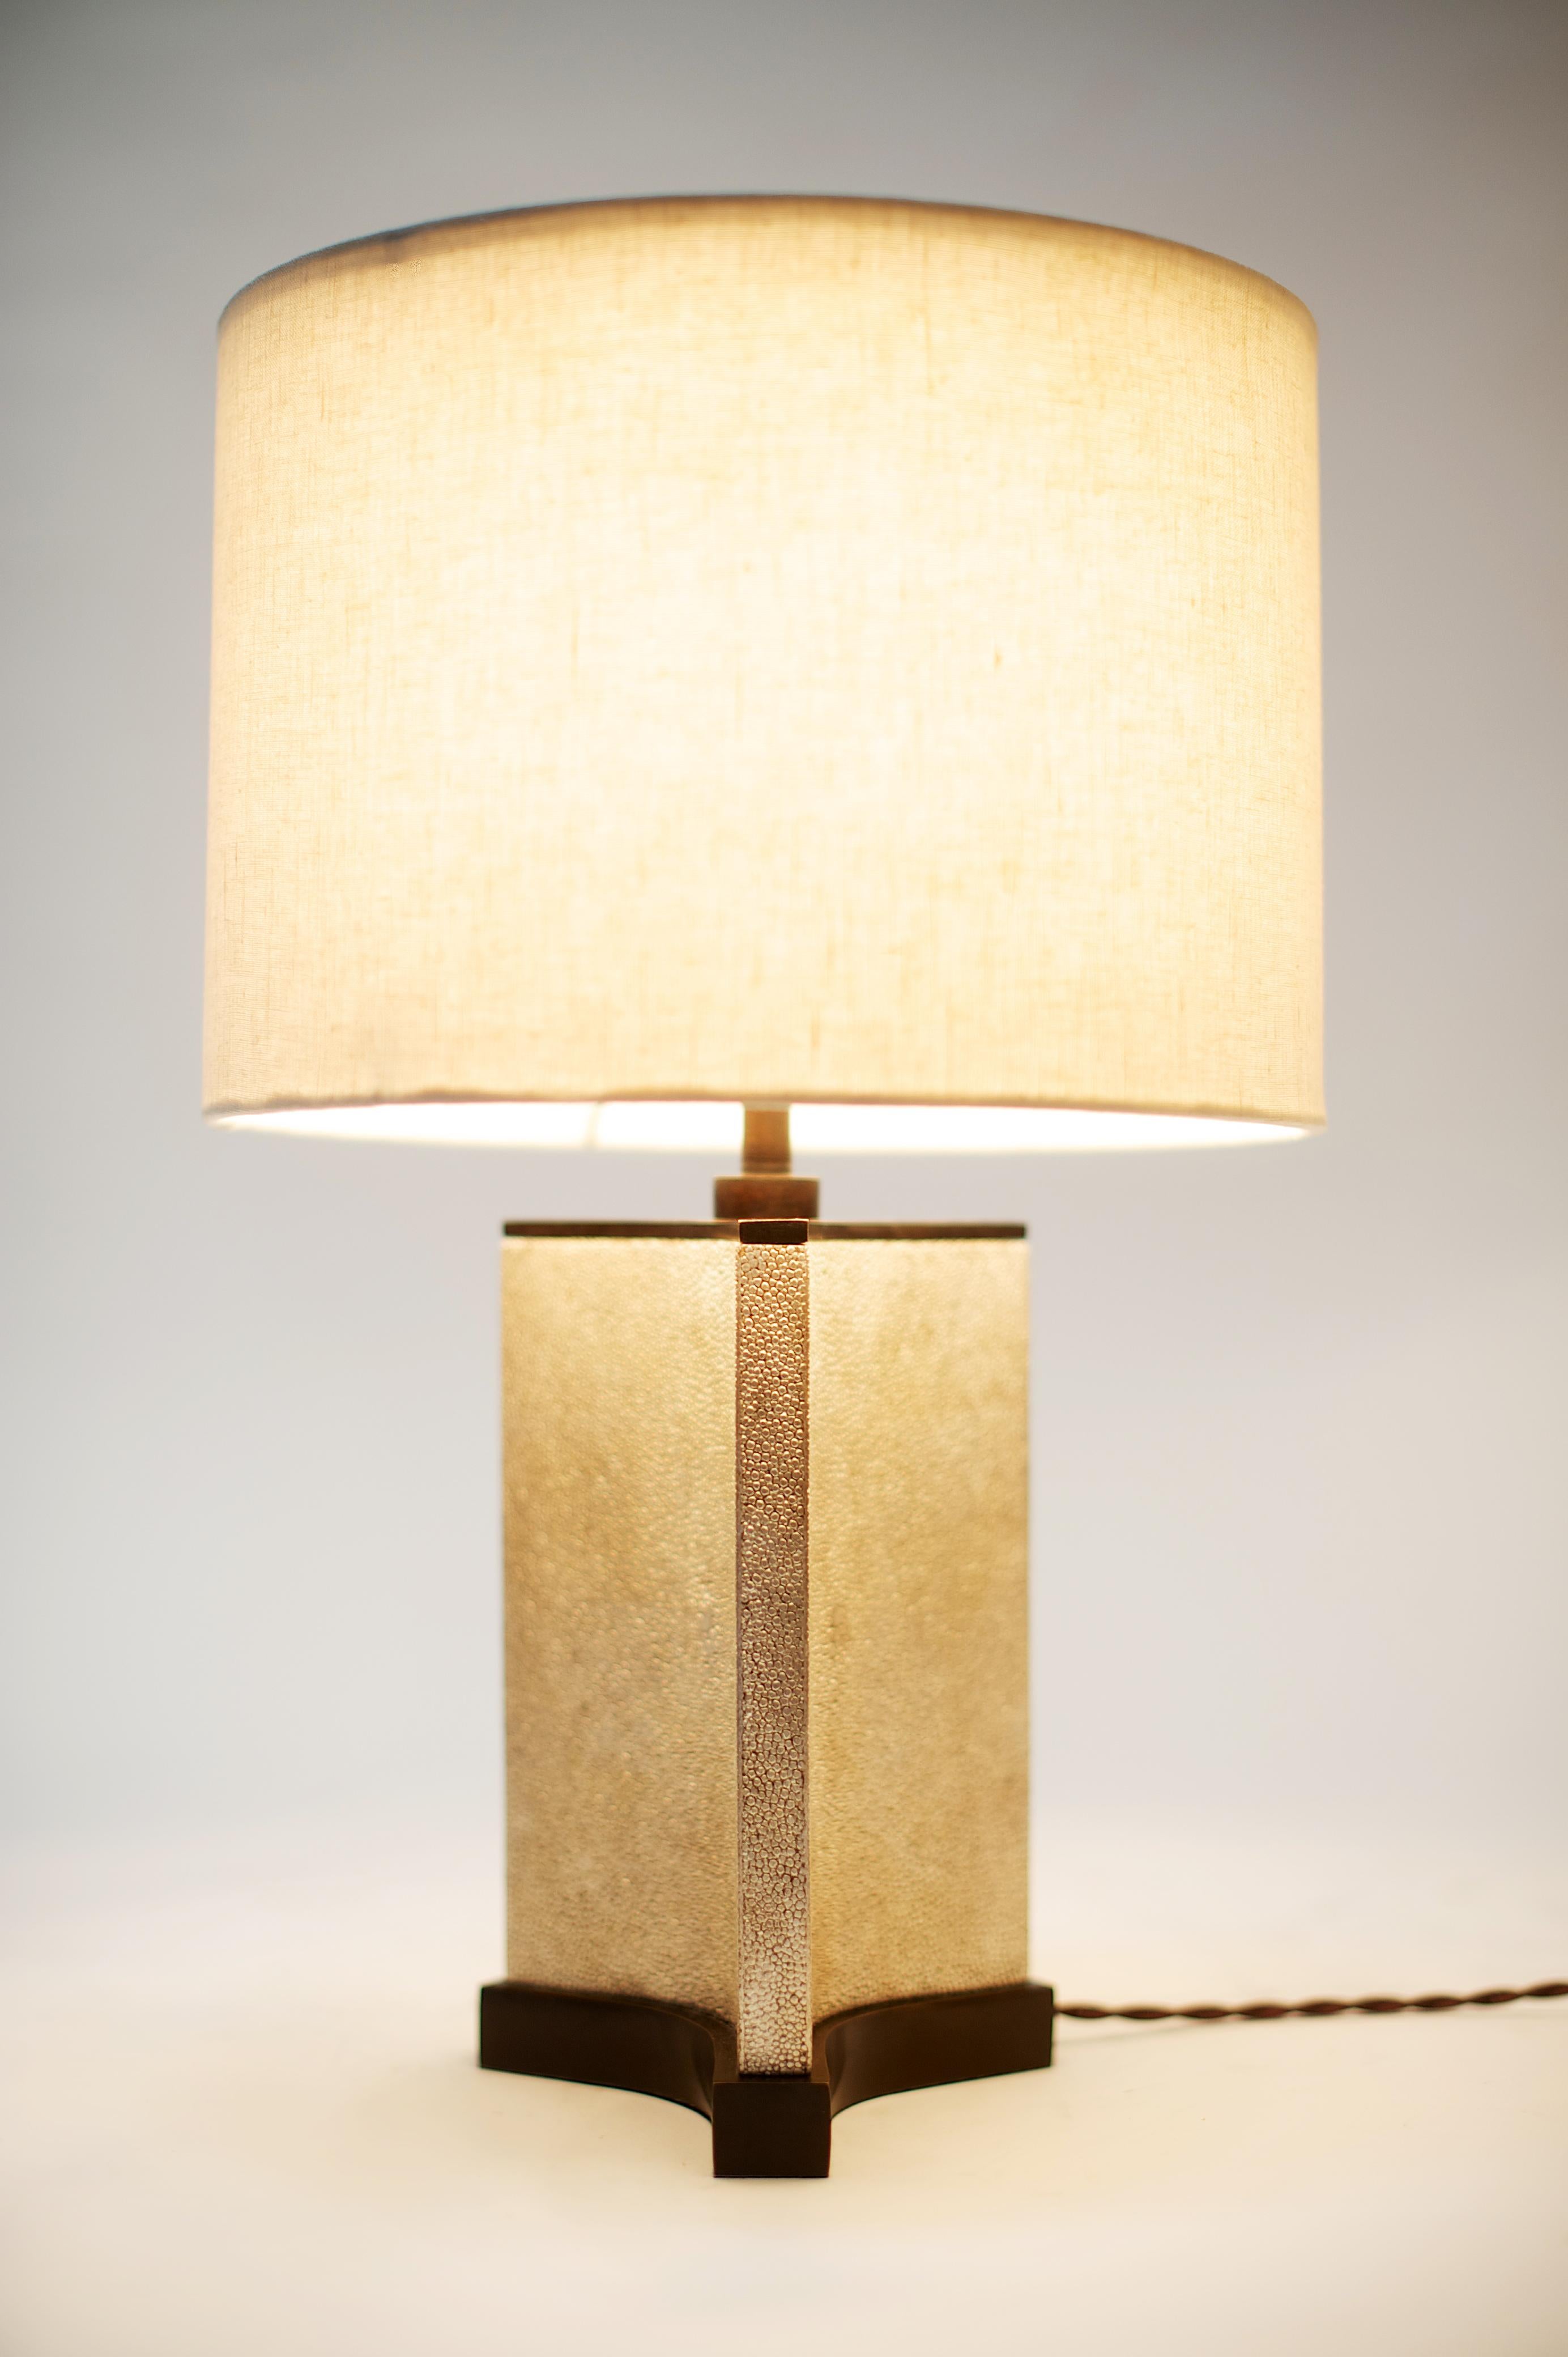 Small Bruno Lamp in Shagreen and Bronze by Elan Atelier

Sculptural lamp in cast bronze and shagreen by Elan Atelier in small size. Custom sizes and finishes available.

Dimensions/
Small/
dia 9.8 x h 15.7 in
dia 25 x h 40 cm

Large/
dia 13.8 x h